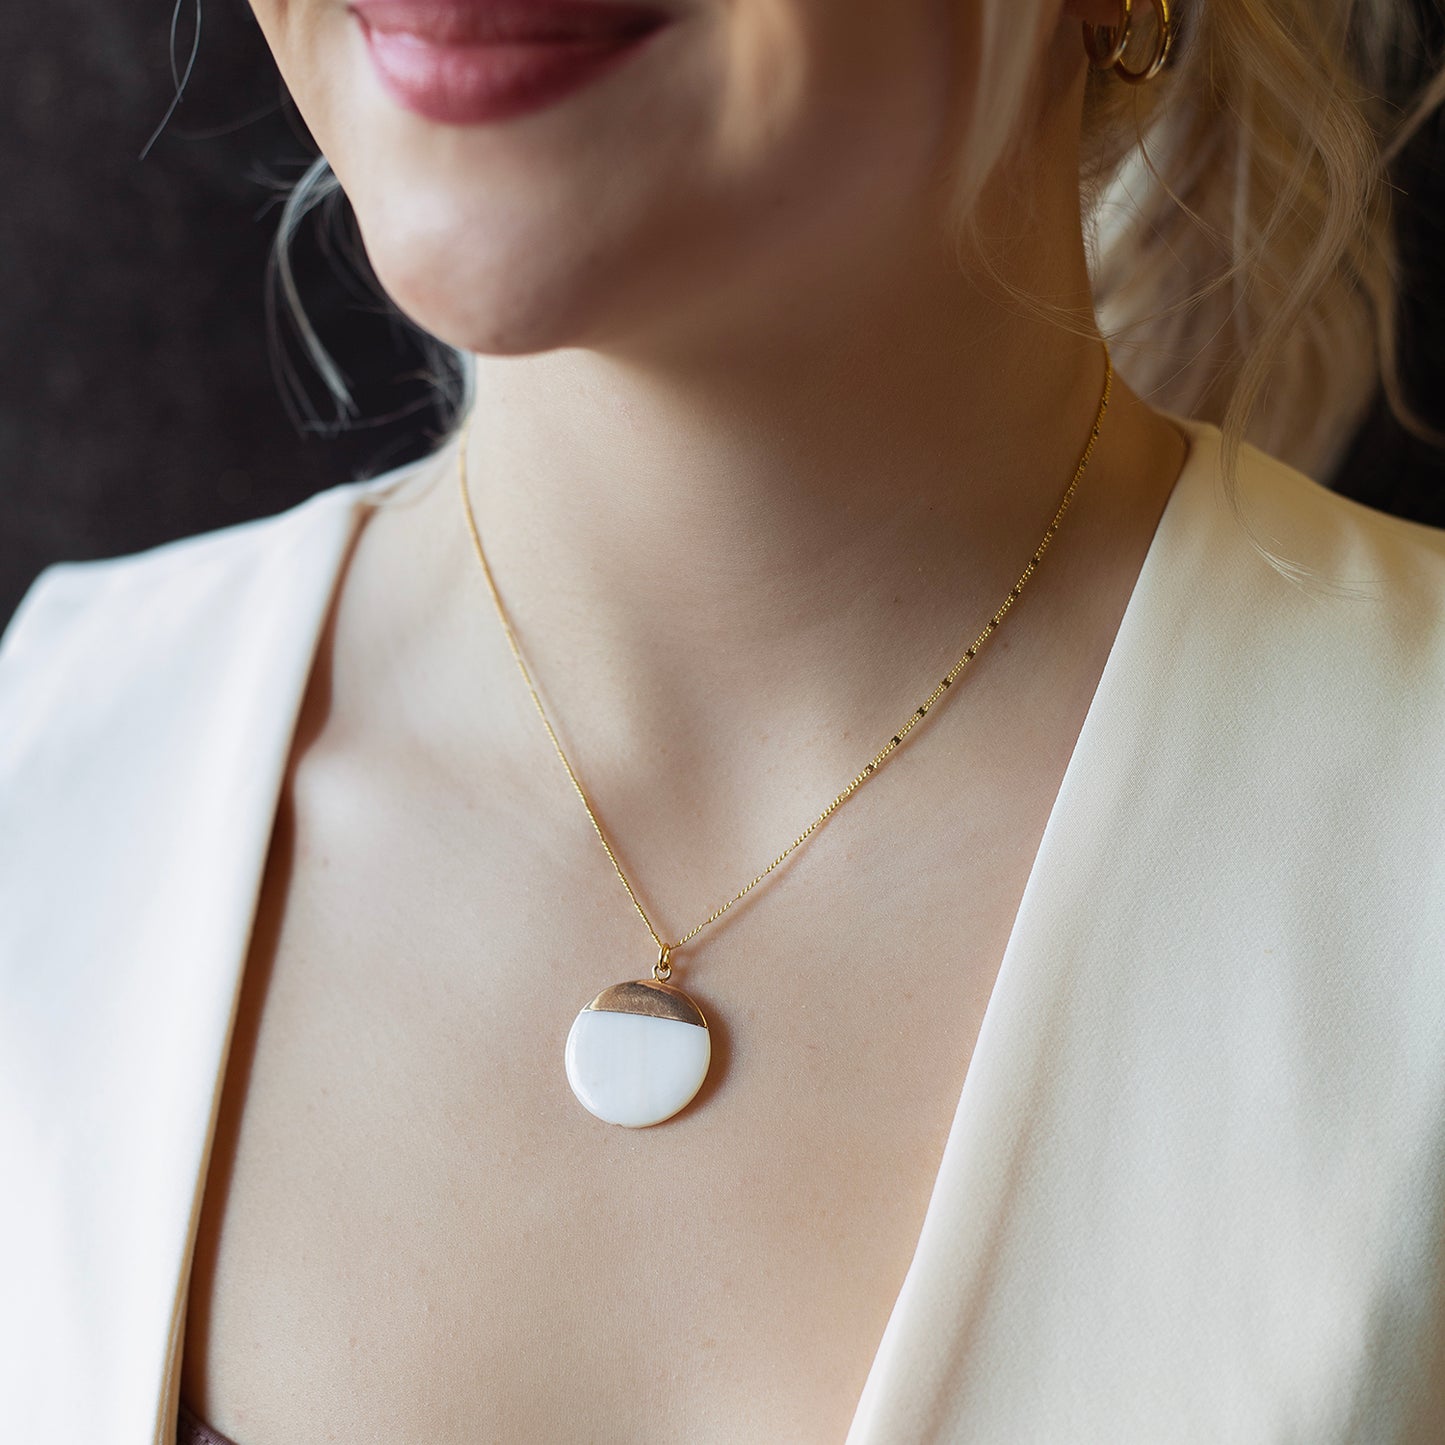 Intentions Necklace, Mother of Pearl Dipped